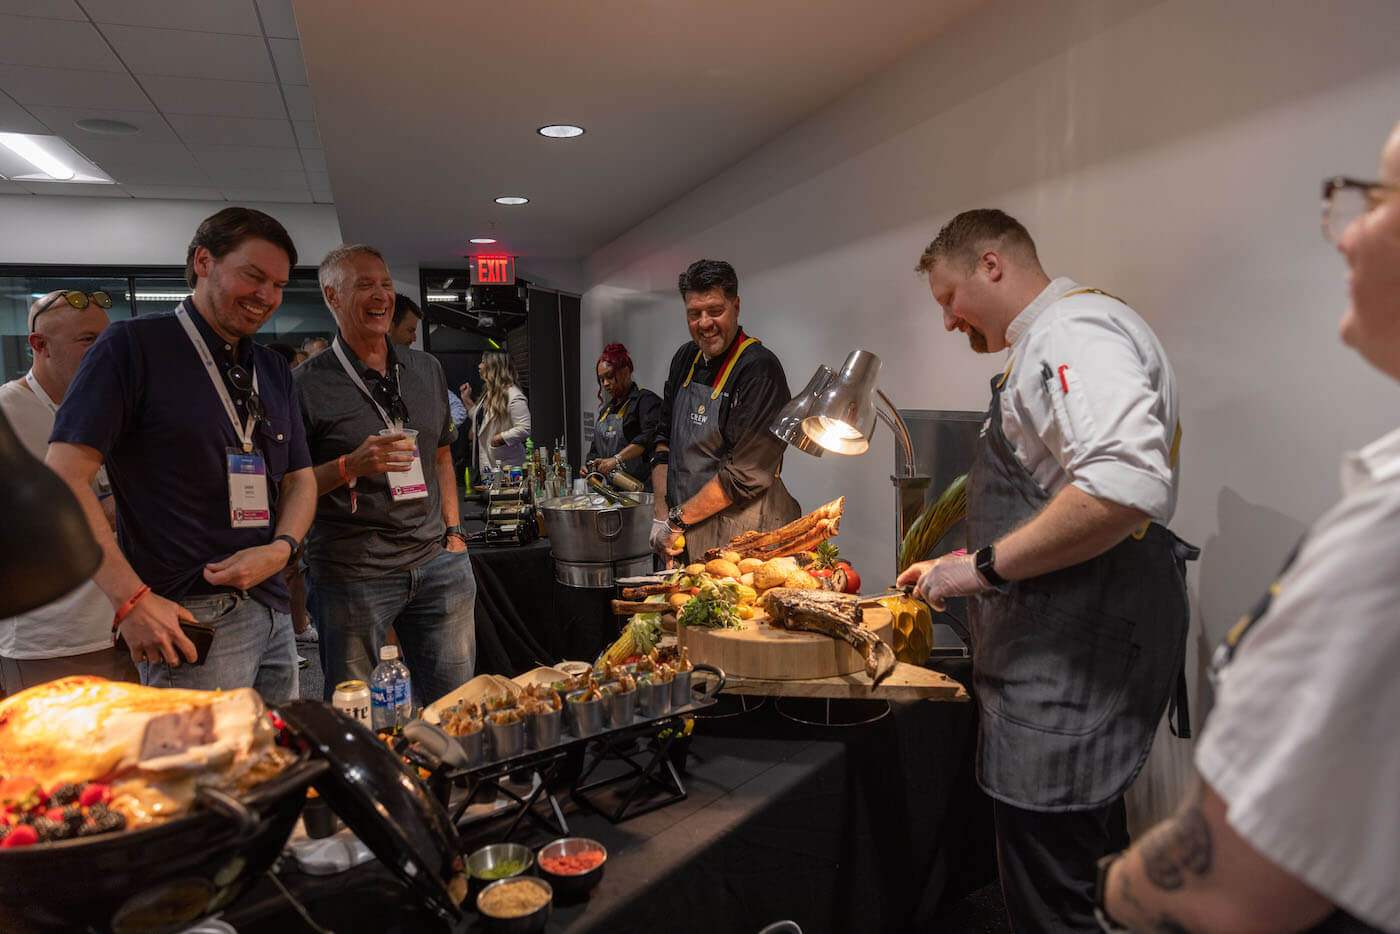 Private chef for an event at Lower.com Field